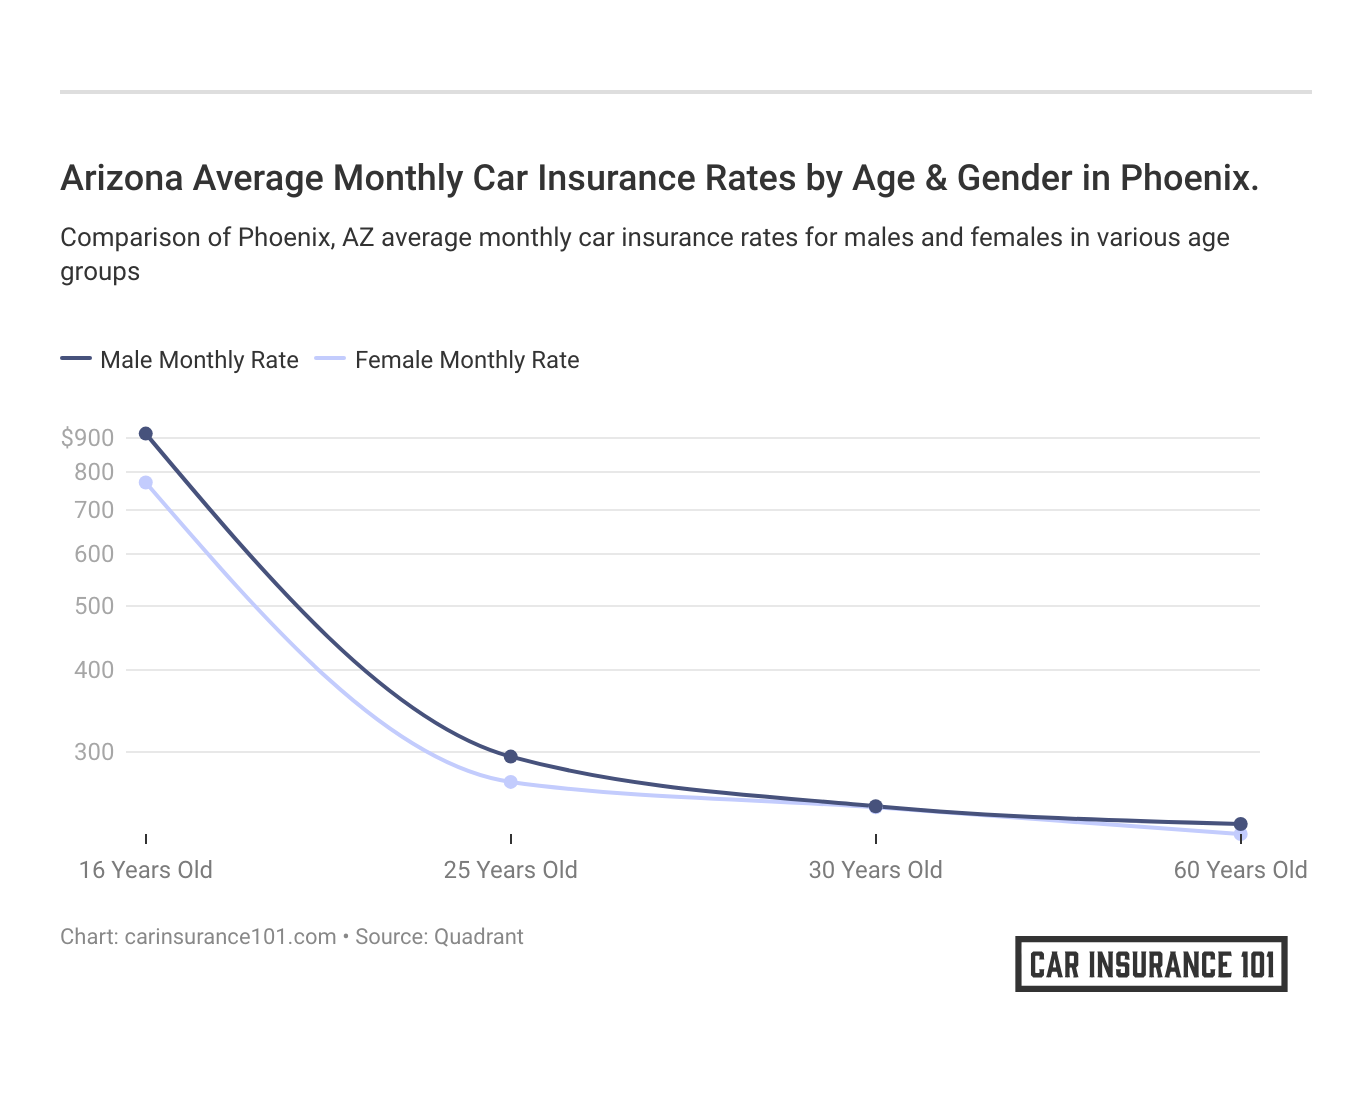 <h3>Arizona Average Monthly Car Insurance Rates by Age & Gender in Phoenix.</h3>